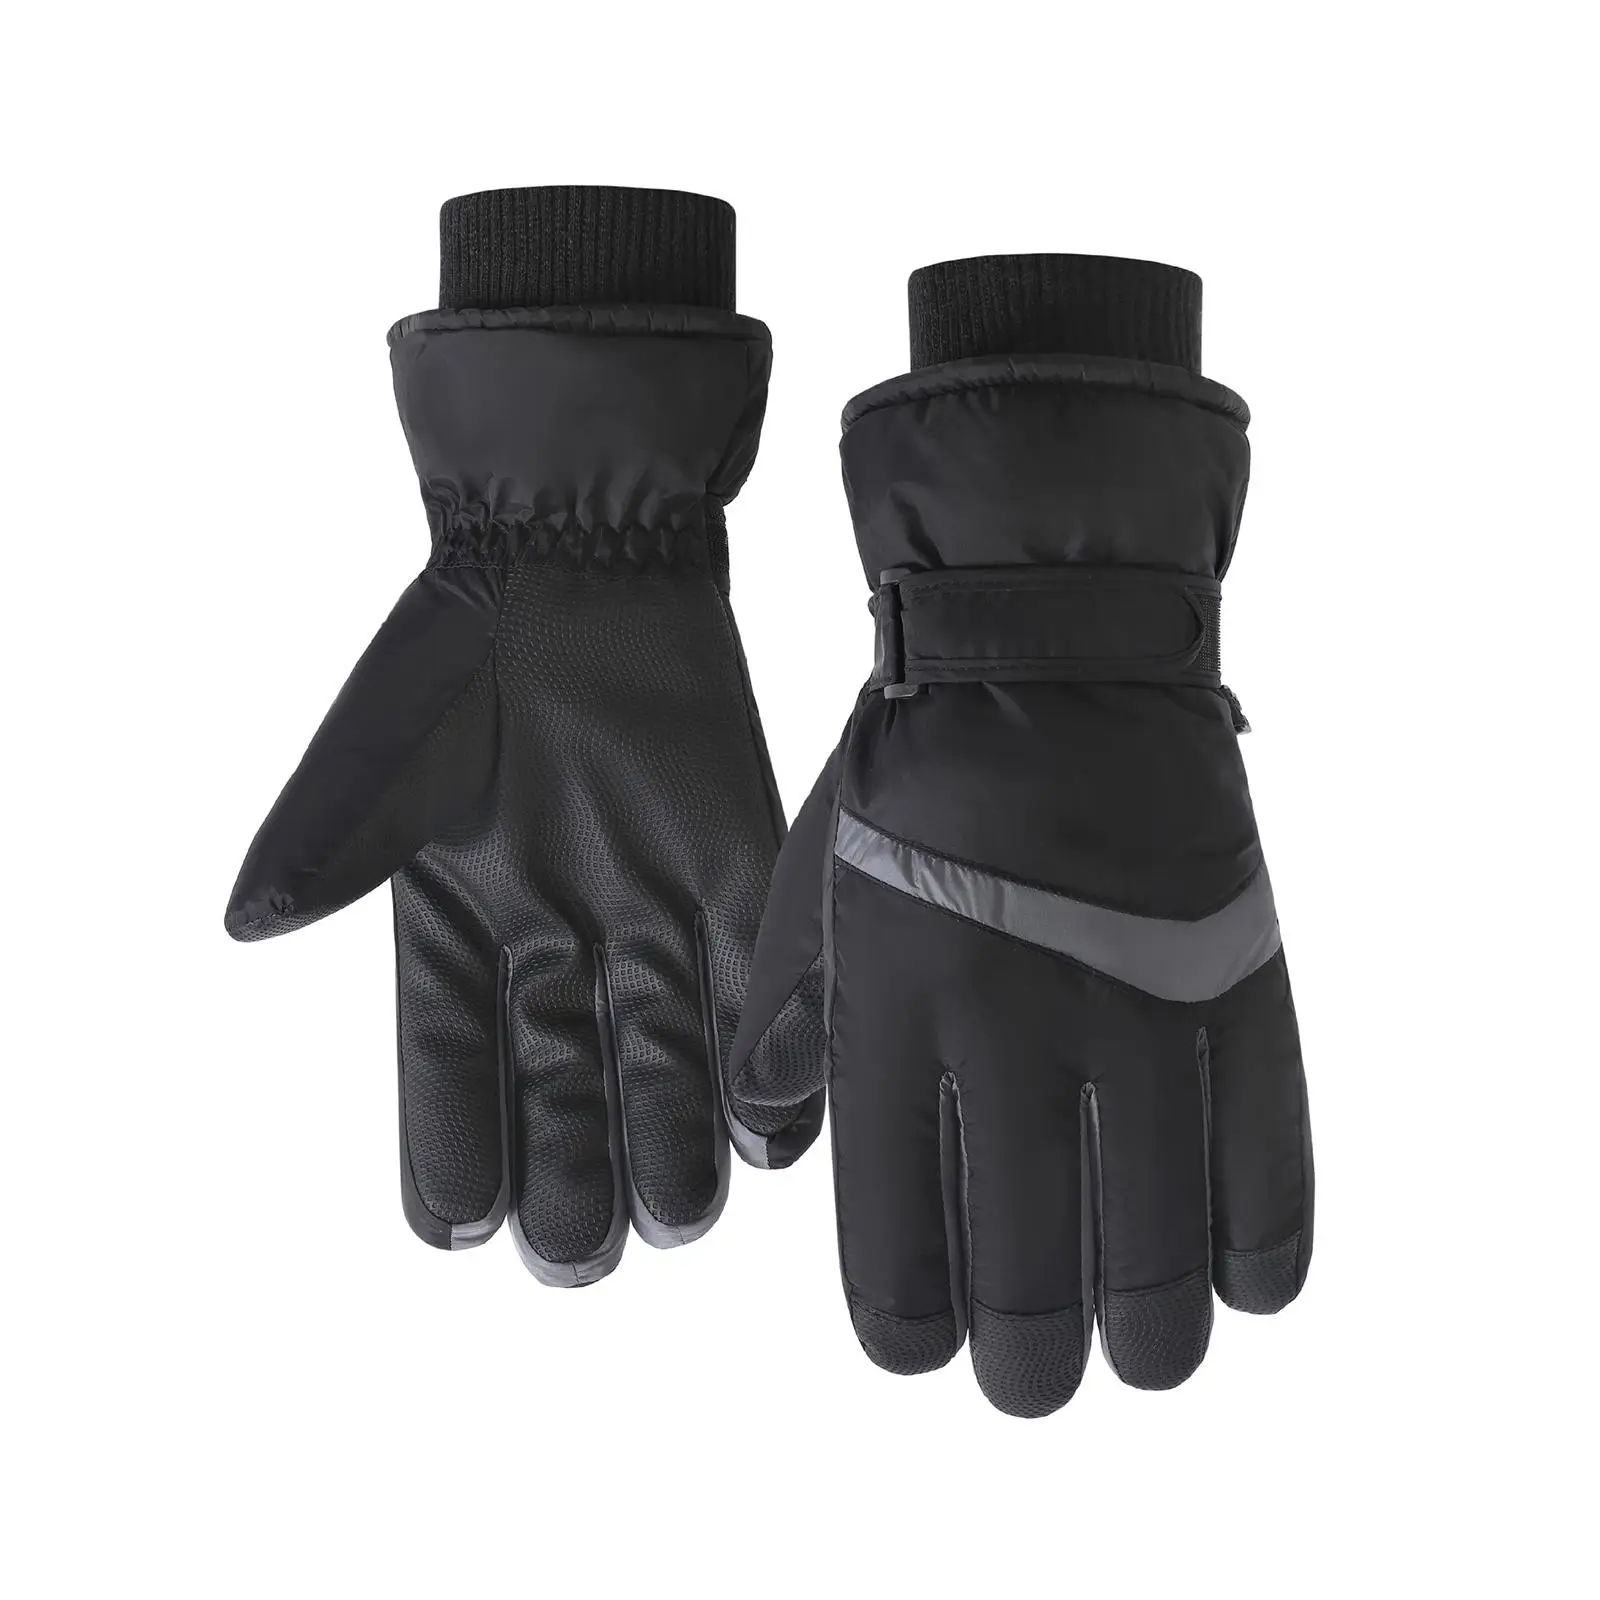 Winter Snowboard Gloves for Cold Weather Touch Screen Ski Gloves for Running